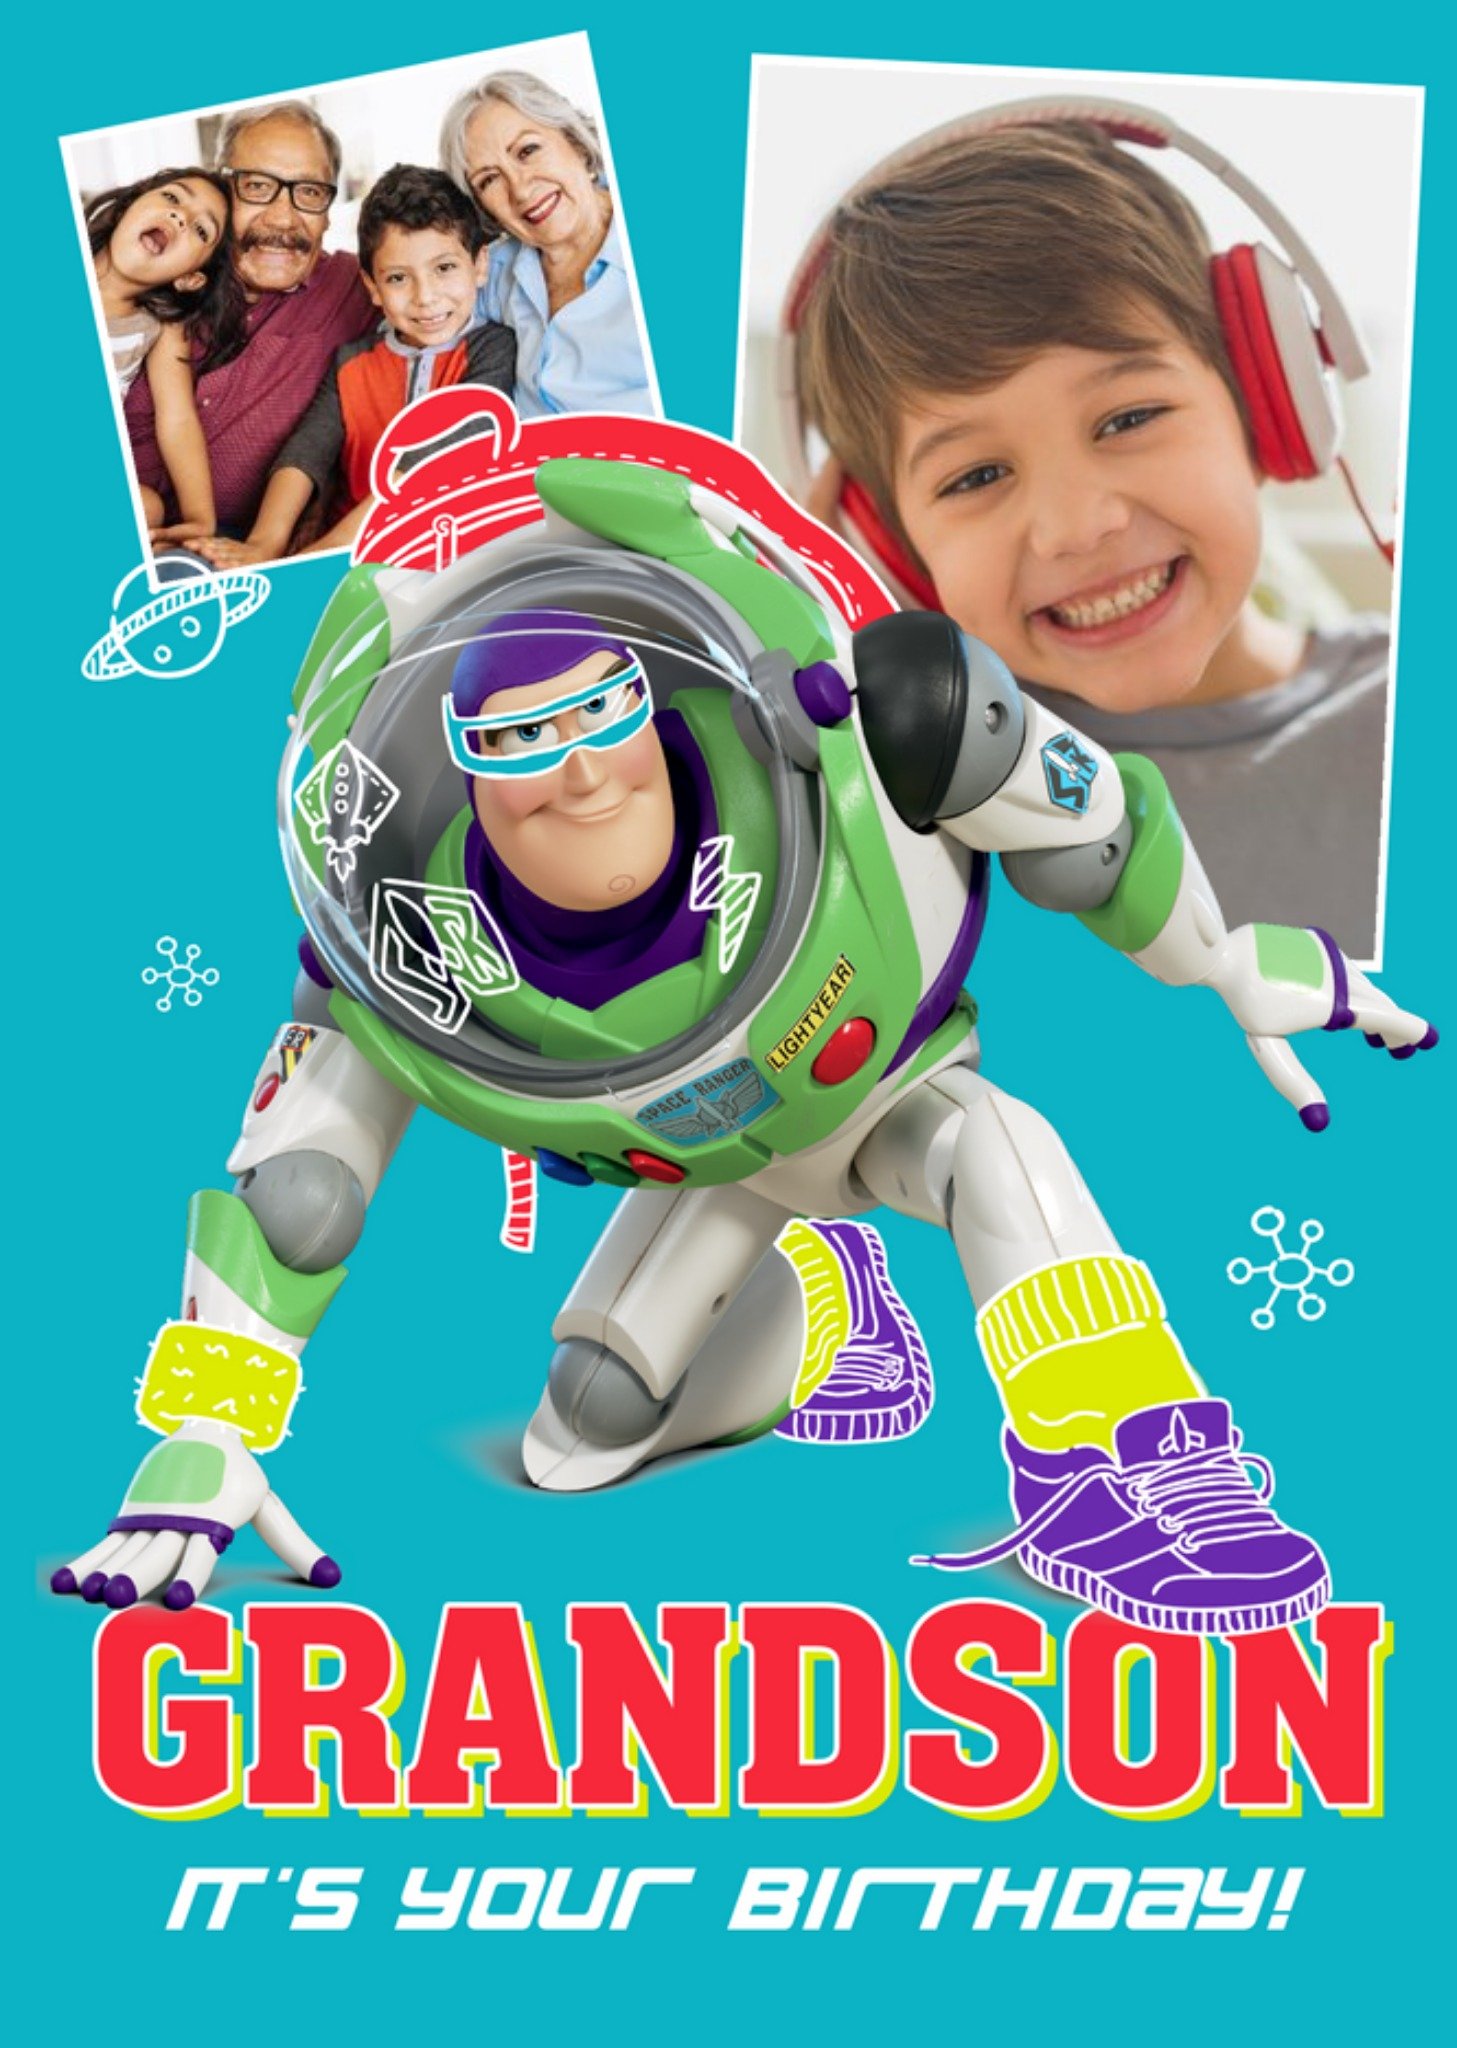 Disney Toy Story Buzz Lightyear Grandson It's Your Birthday Photo Upload Card, Large